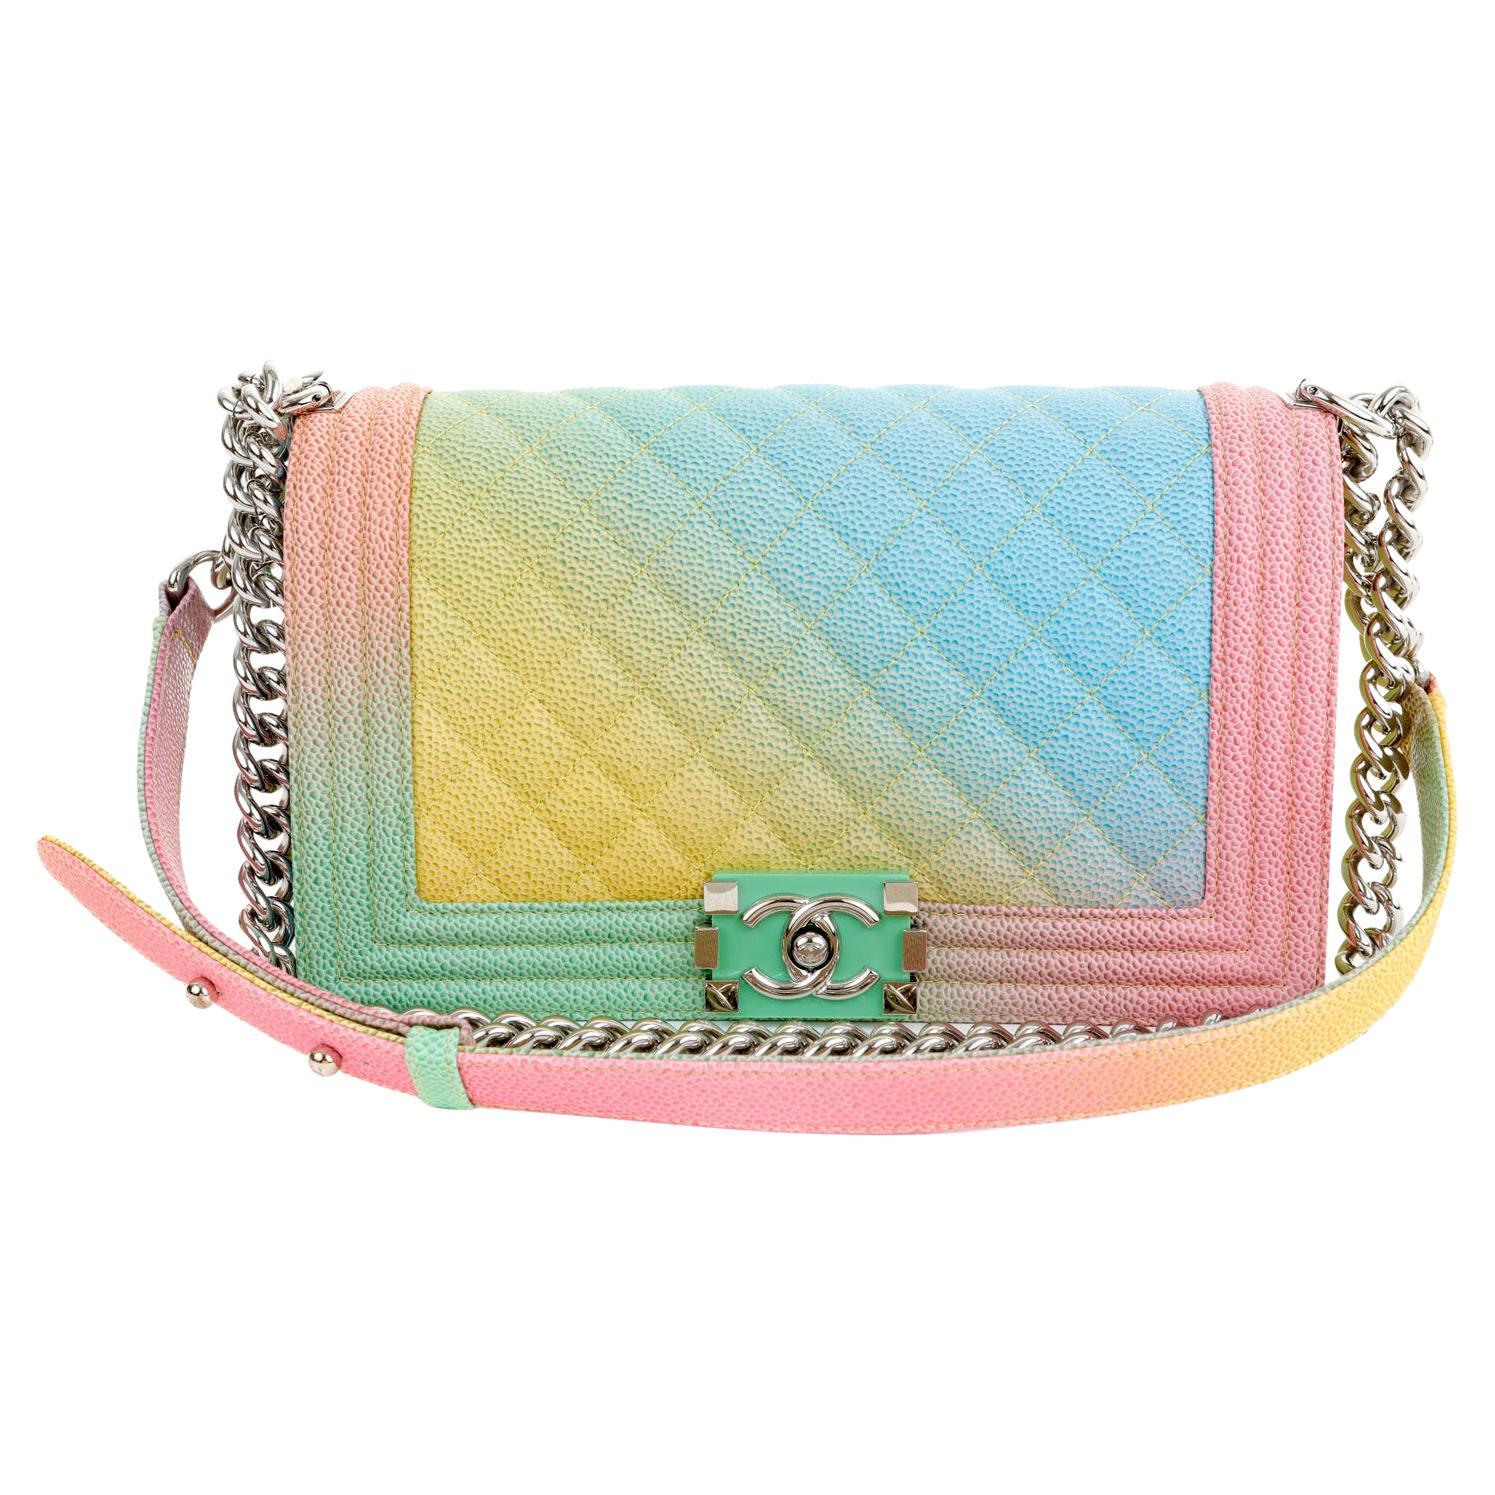 CHANEL, Bags, 2a Rainbow Sequin Chanel Deauville